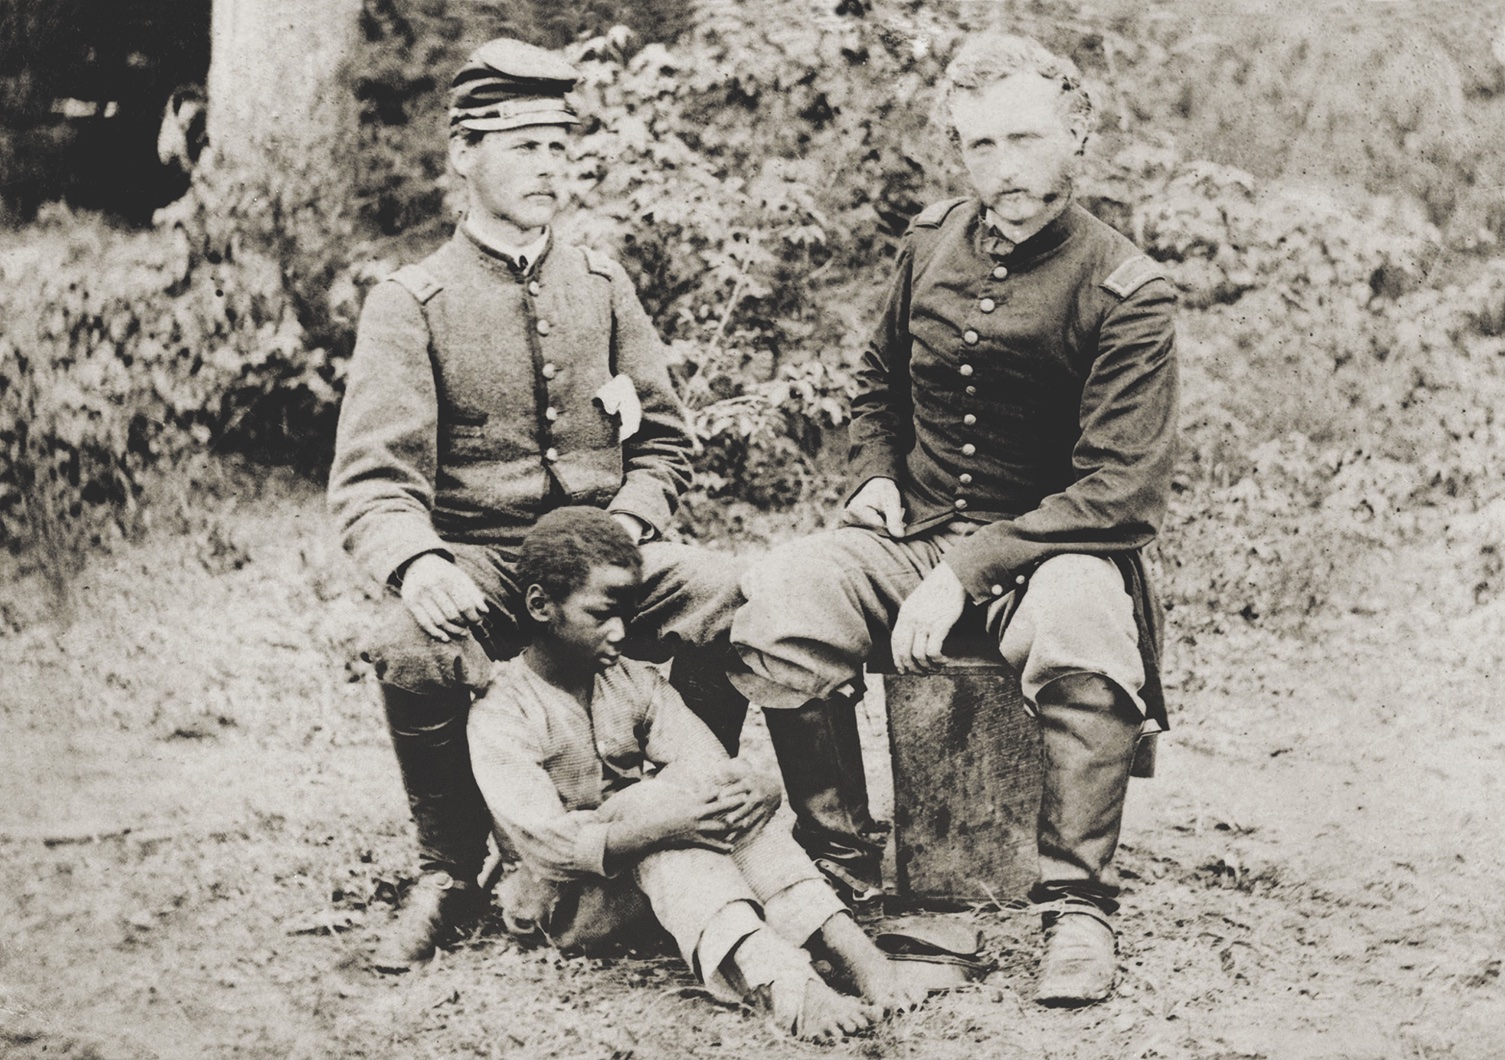 In this Peninsula image of captured Confederate Lieutenant J.B. Washington and his friend, Captain George Custer, the unknown African American boy is often overlooked. But his presence speaks to evolving war aims. (National Archives)